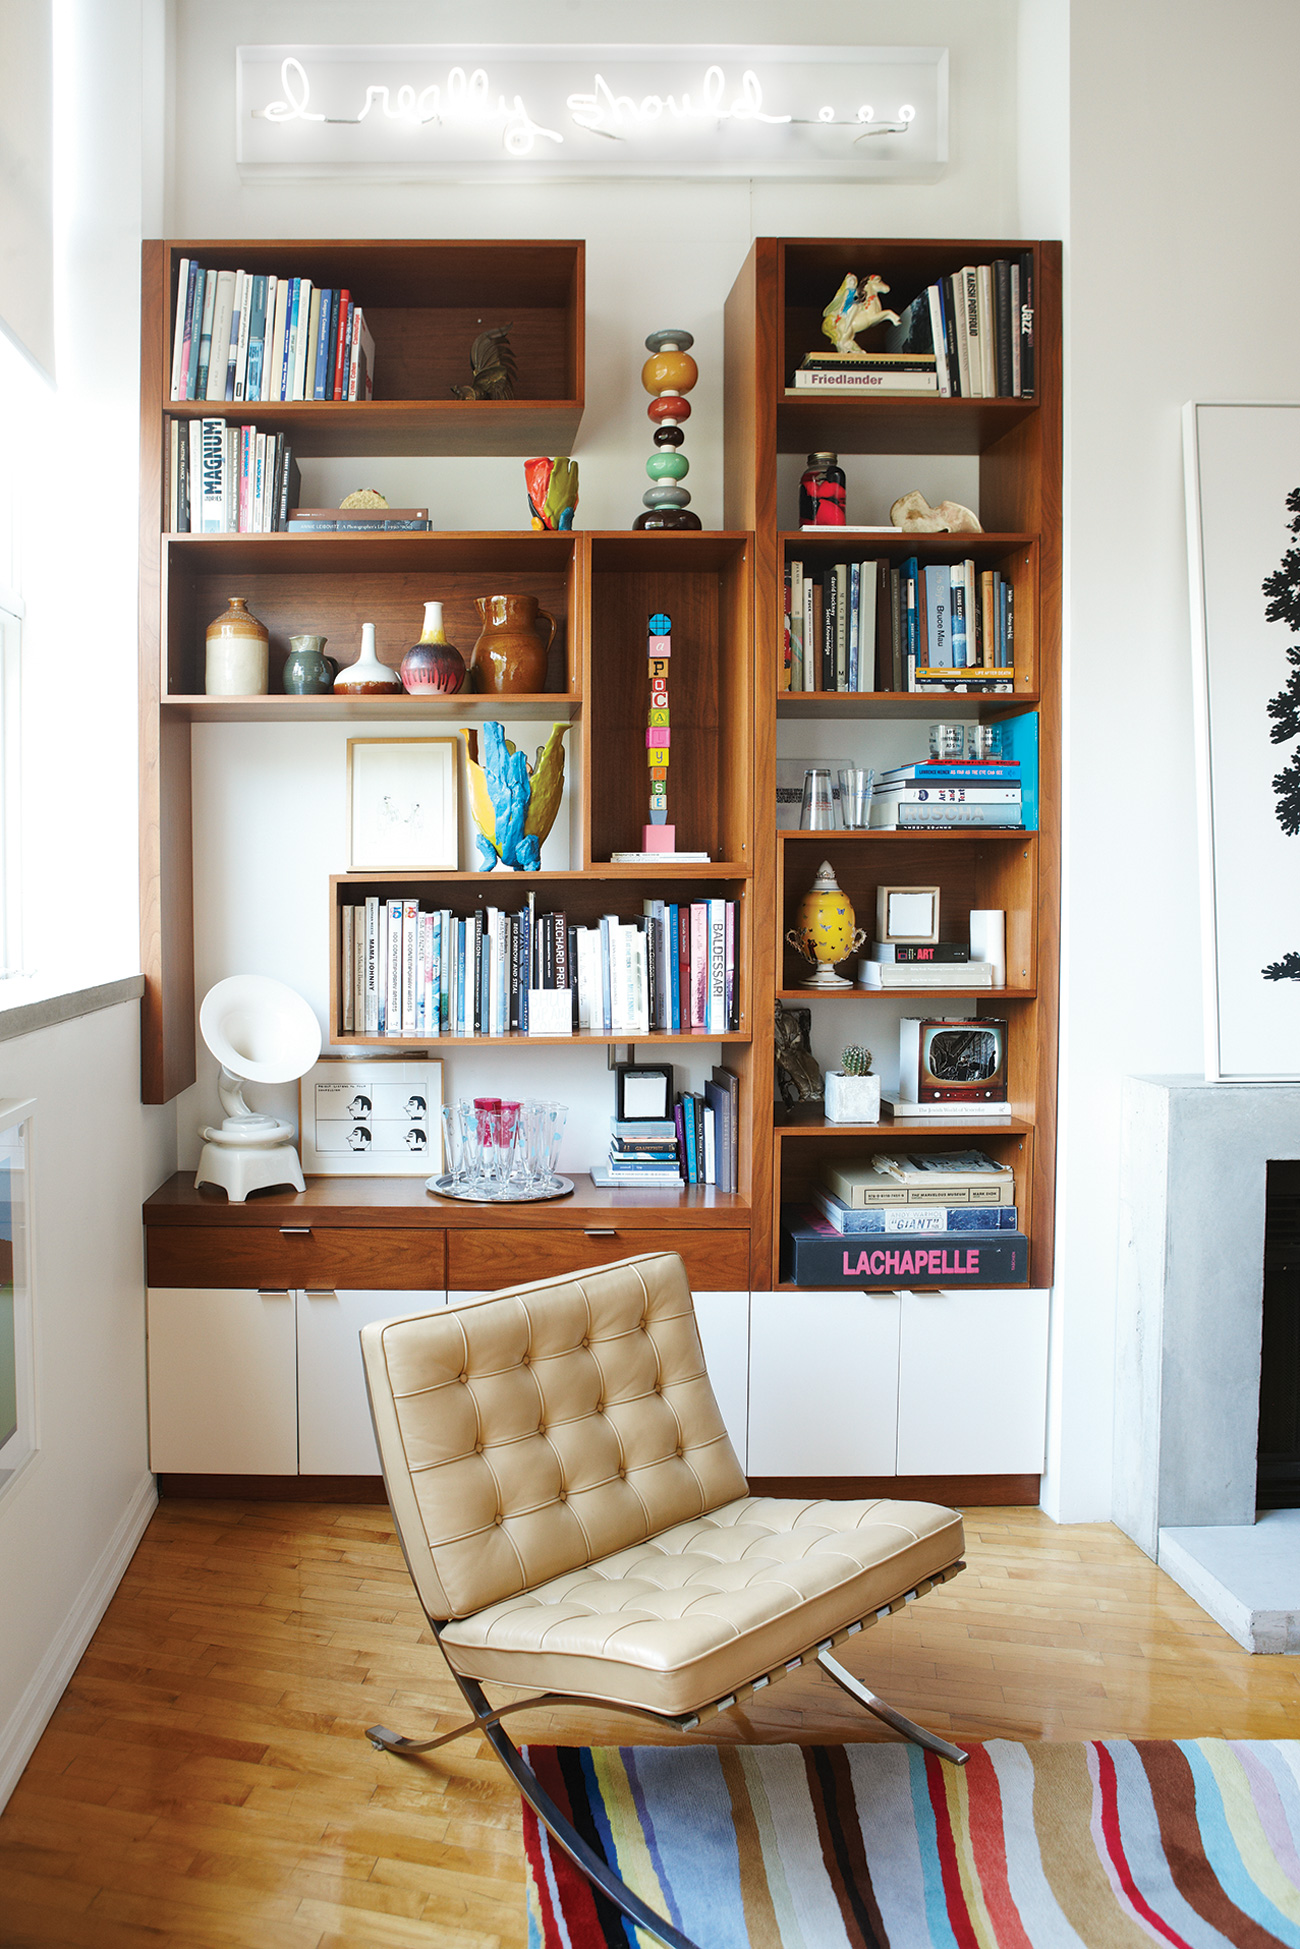 The bookcase contains a number of artworks including a talking stick by Douglas Coupland (centre) and Science & Son’s ceramic Phonophone. Neon sculpture by Kelly Mark.